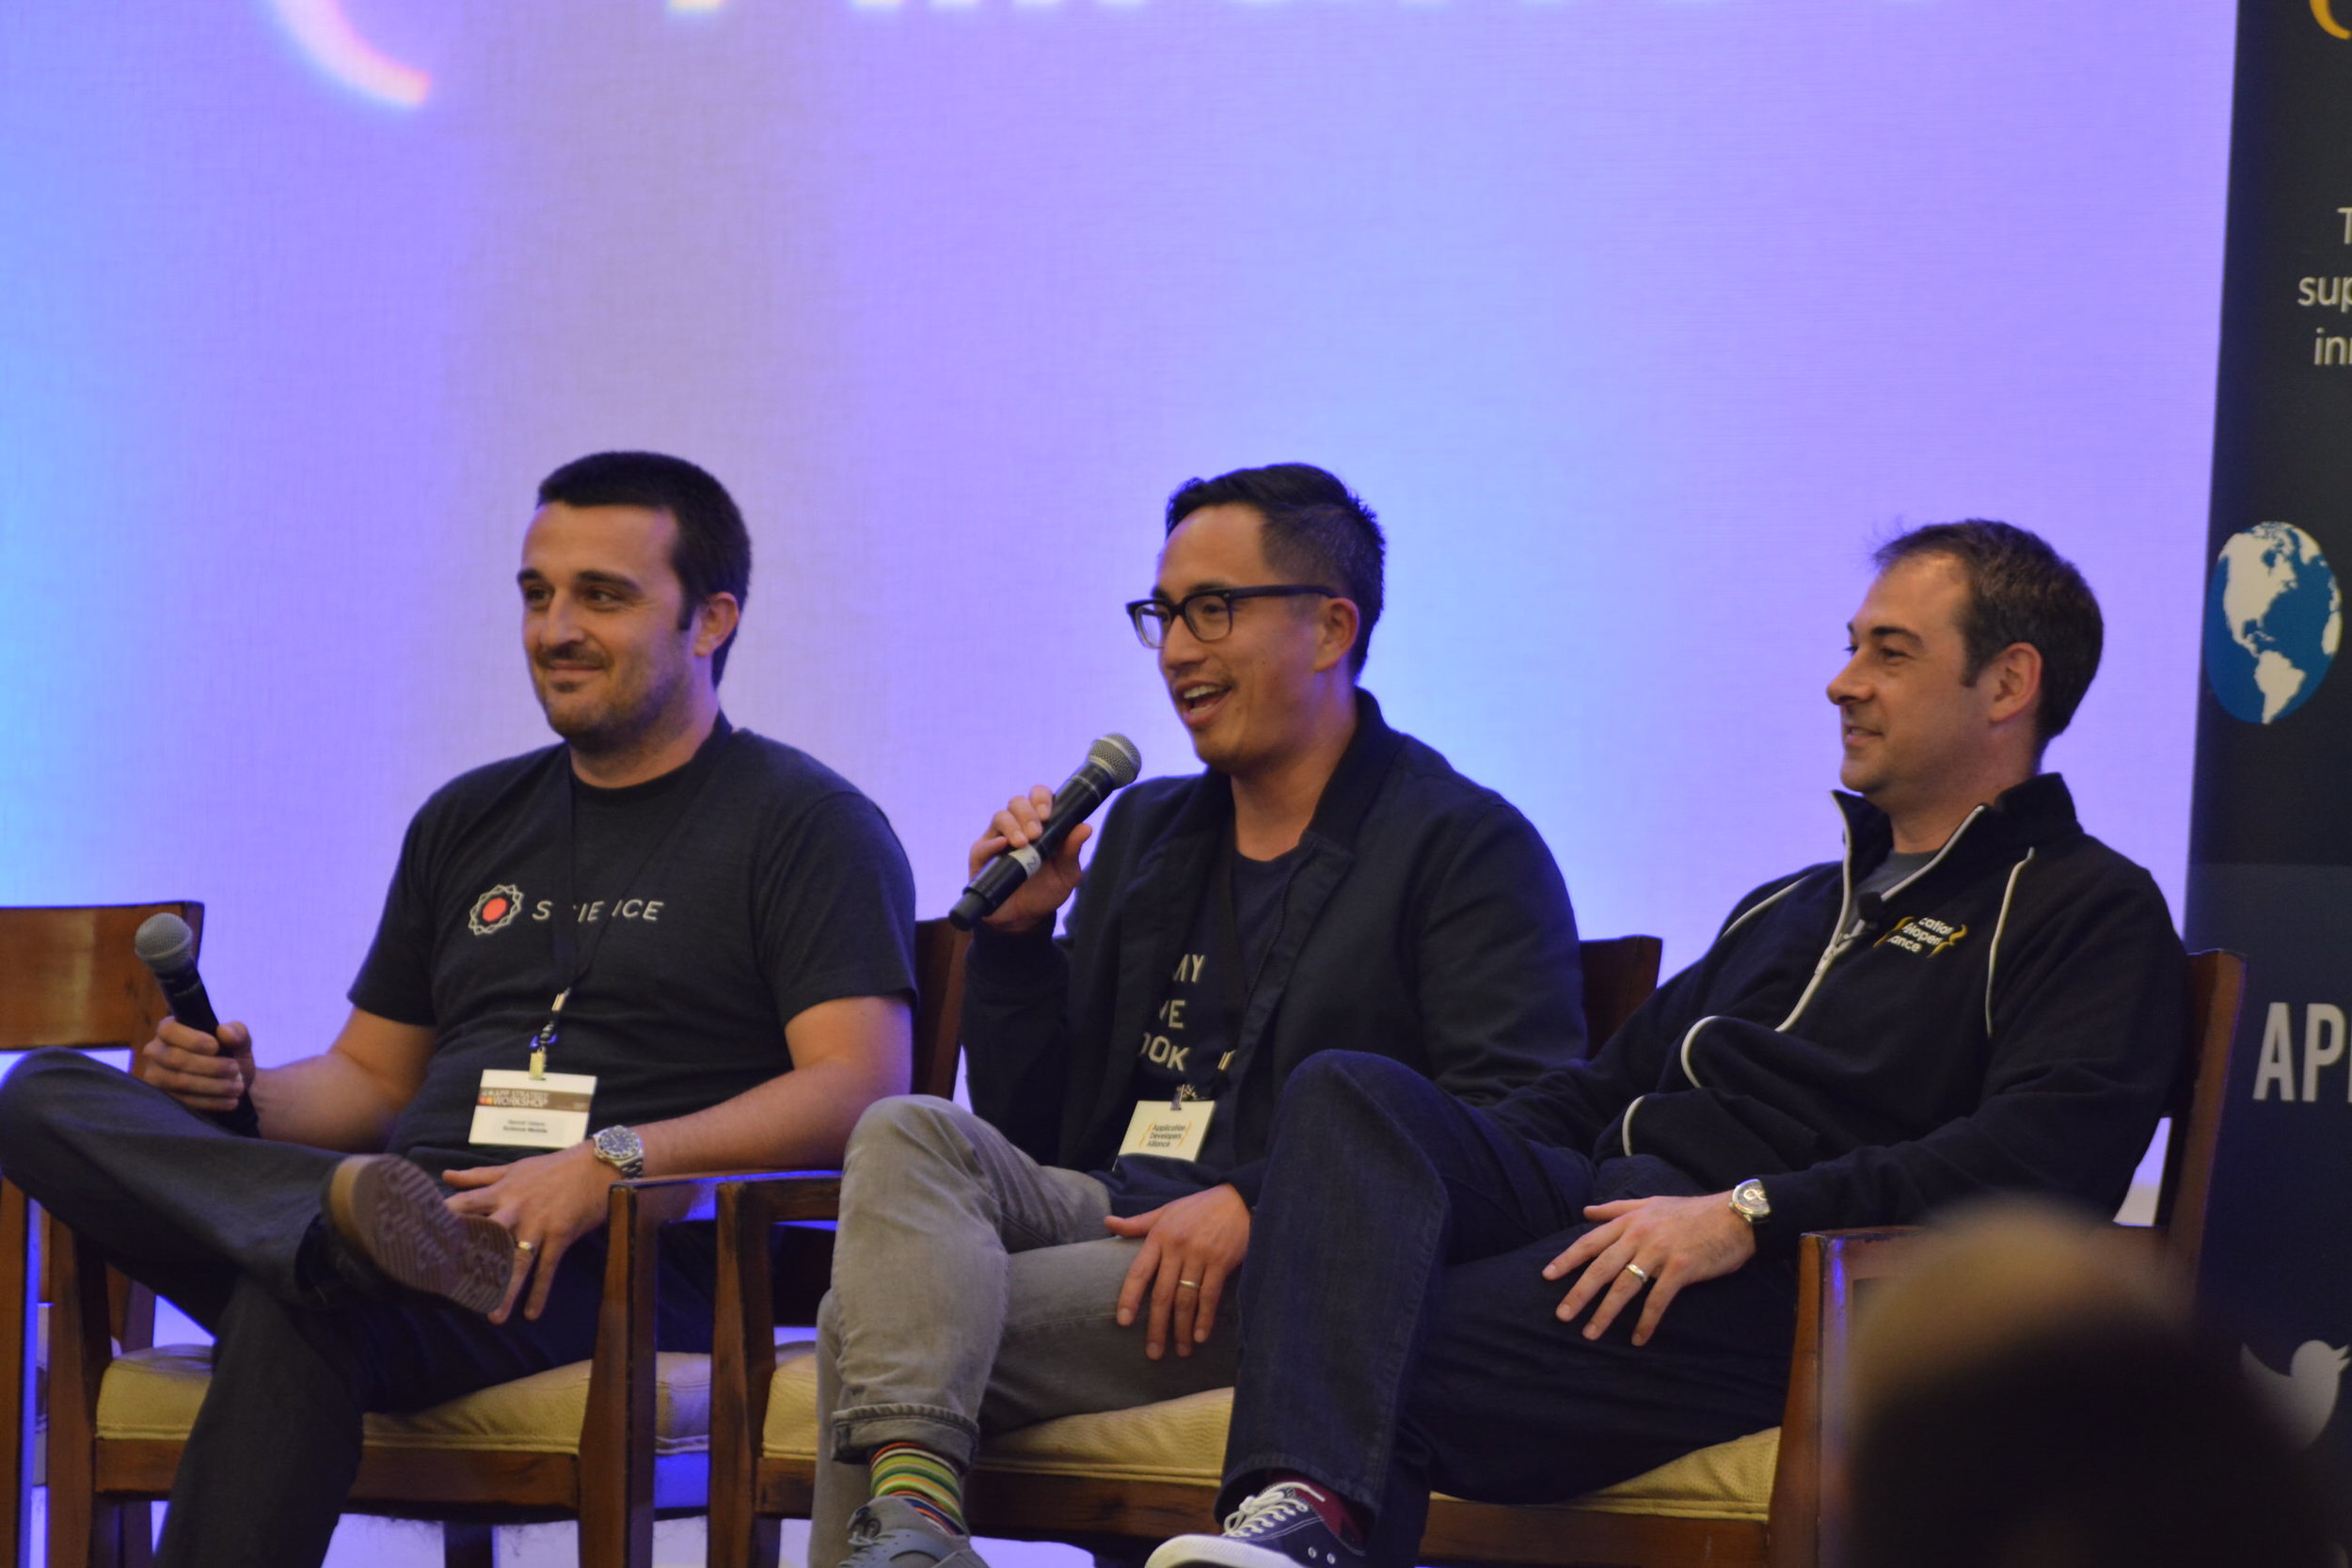 This panel features Jake Ward (CEO and President, App Developers Alliance), Nikao Yang (EVP of Global Publishing, AdColony), and Benoit Vatere (General Manager, Science Mobile)